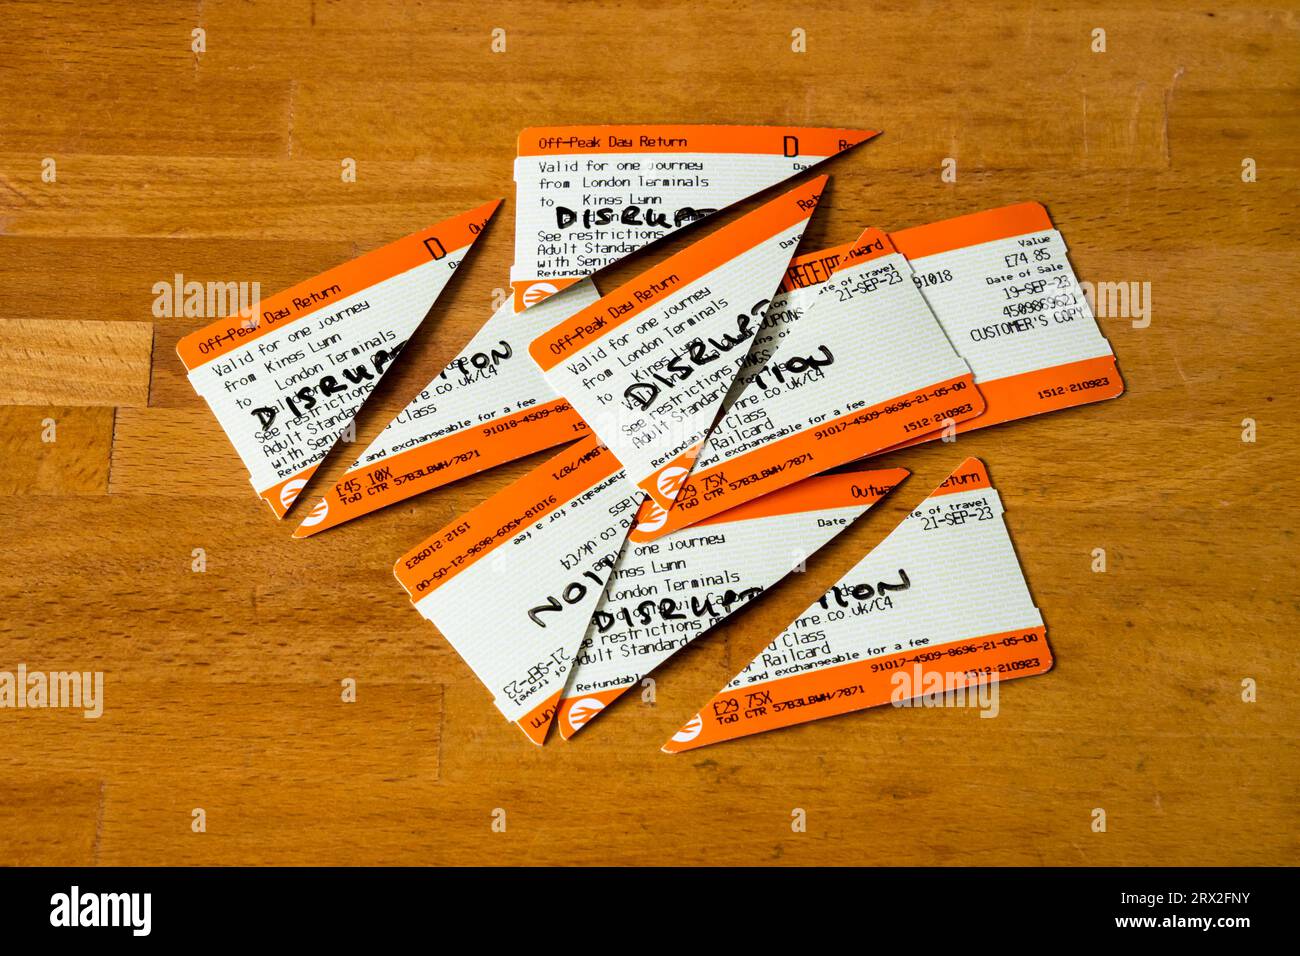 Train tickets cut in half ready to claim refund from Great Northern following train cancellation due to service disruption. Stock Photo